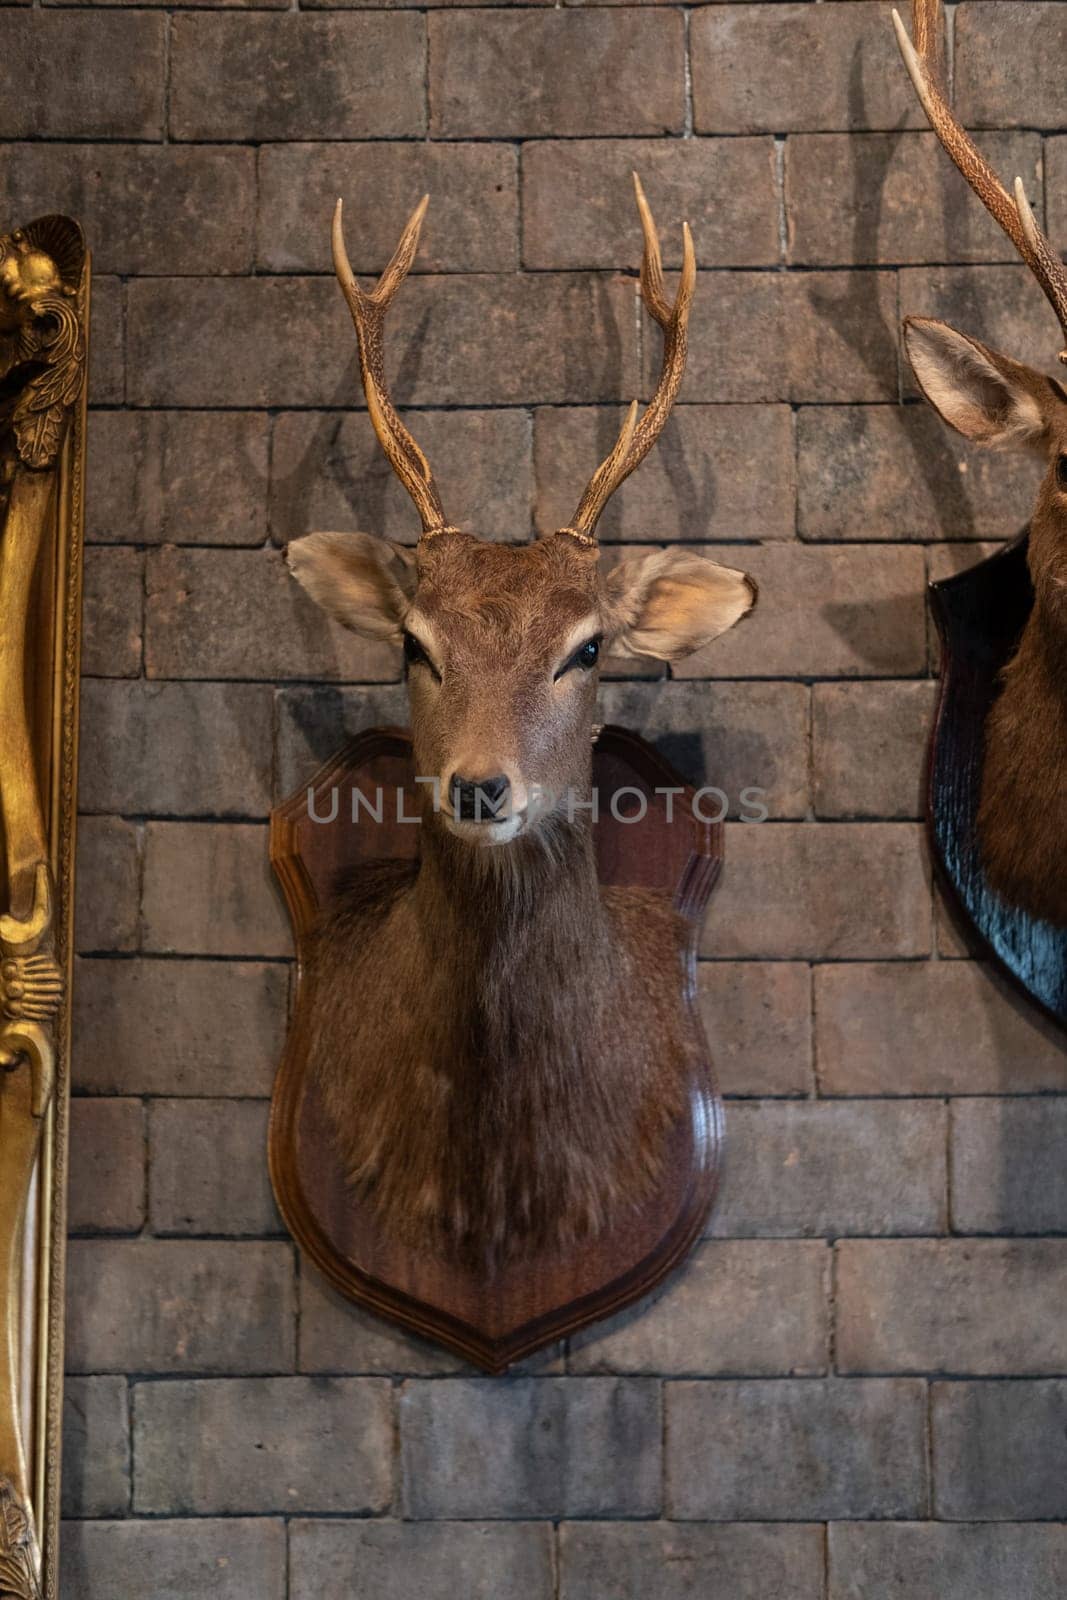 Head deer mount on the wall, 2 head, deer antlers attached to the wall. High quality photo